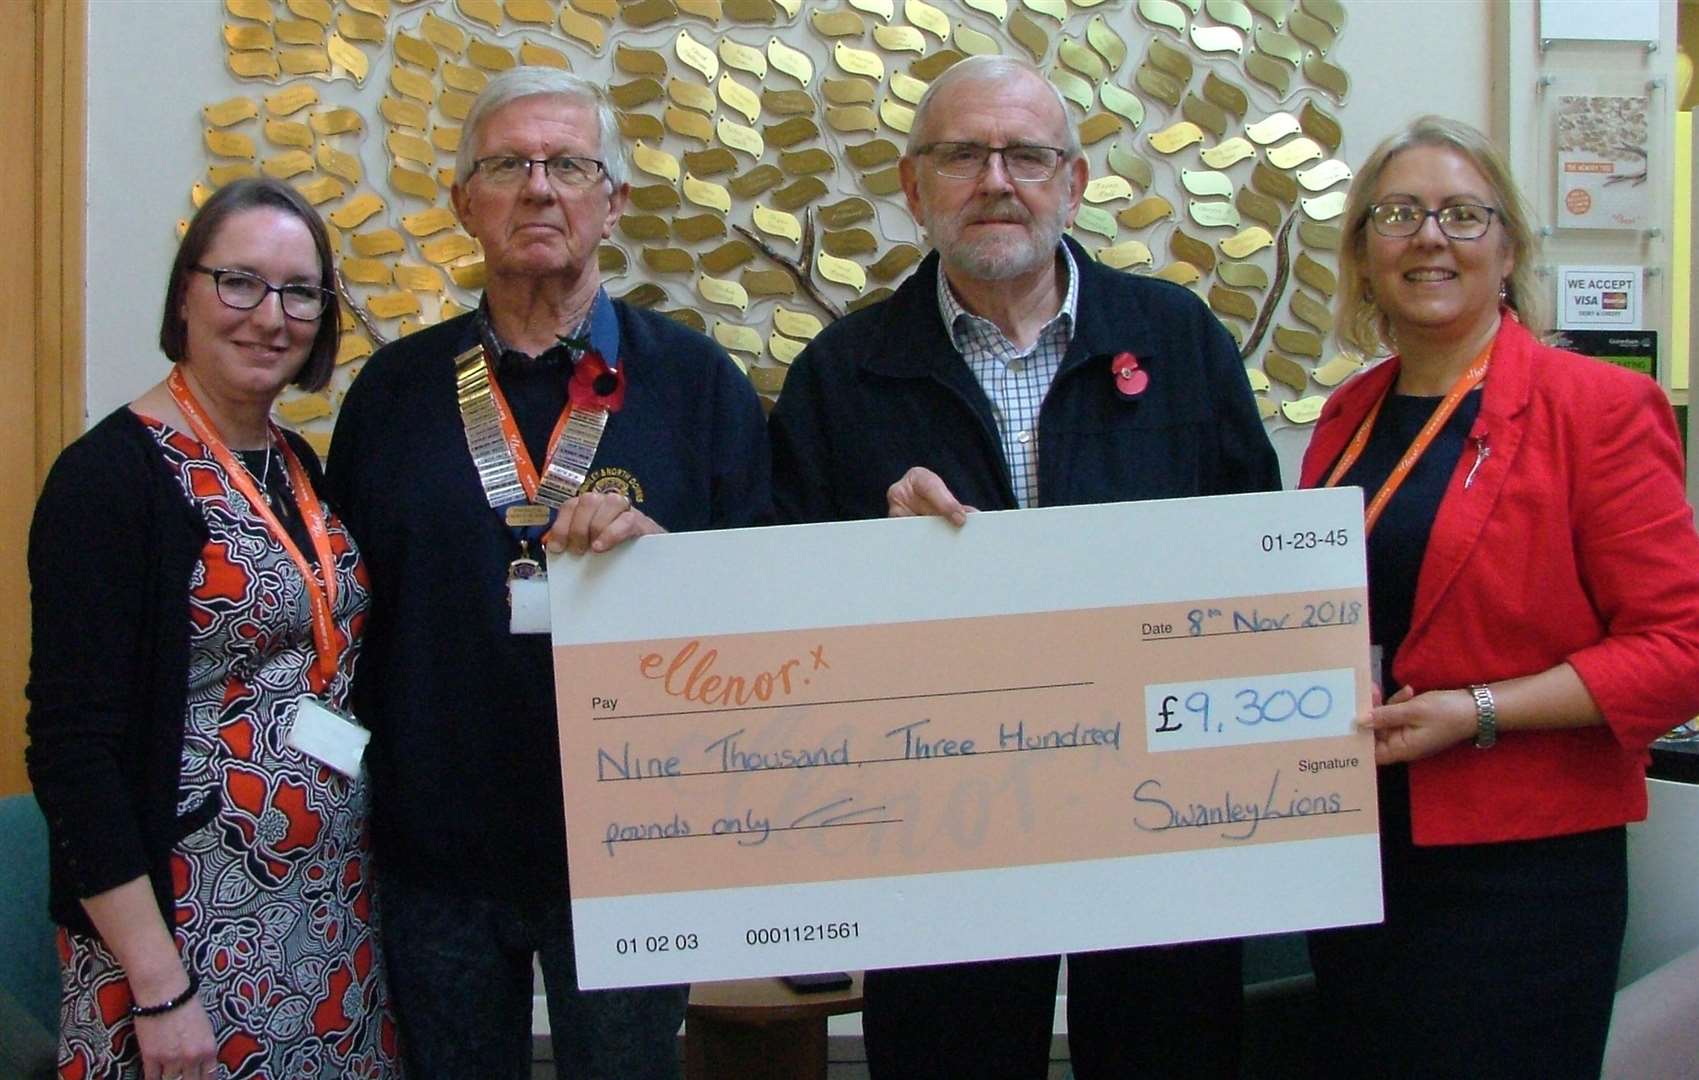 Members of the Swanley & North Downs Lions Club presented the ellenor team with a donation